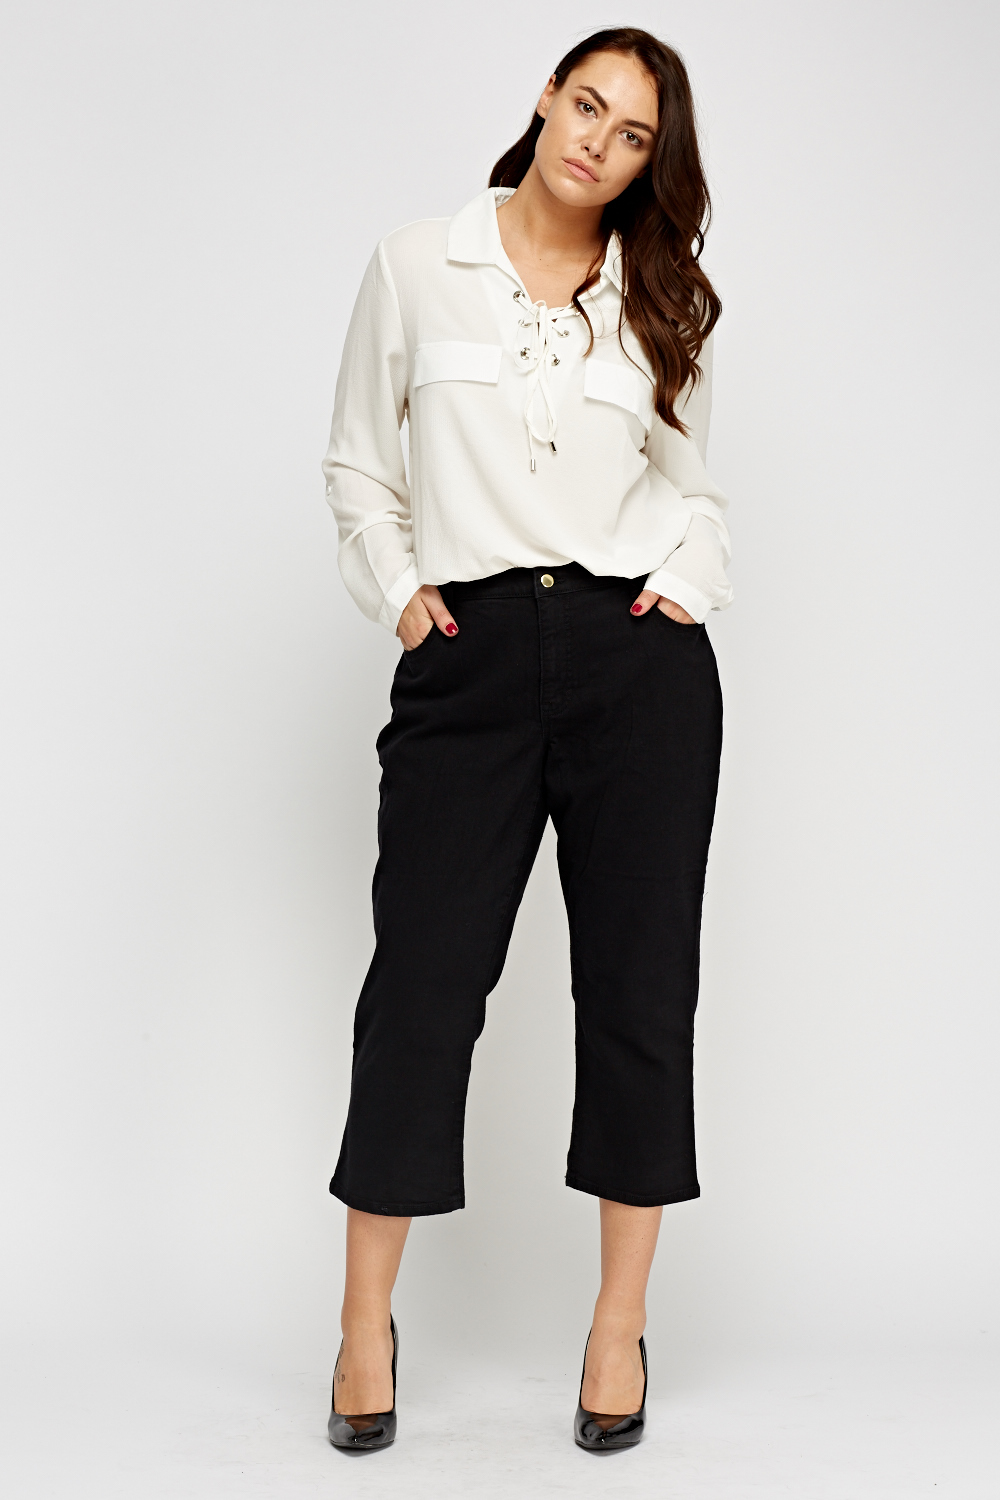 Black Cropped Jeans - Just $7